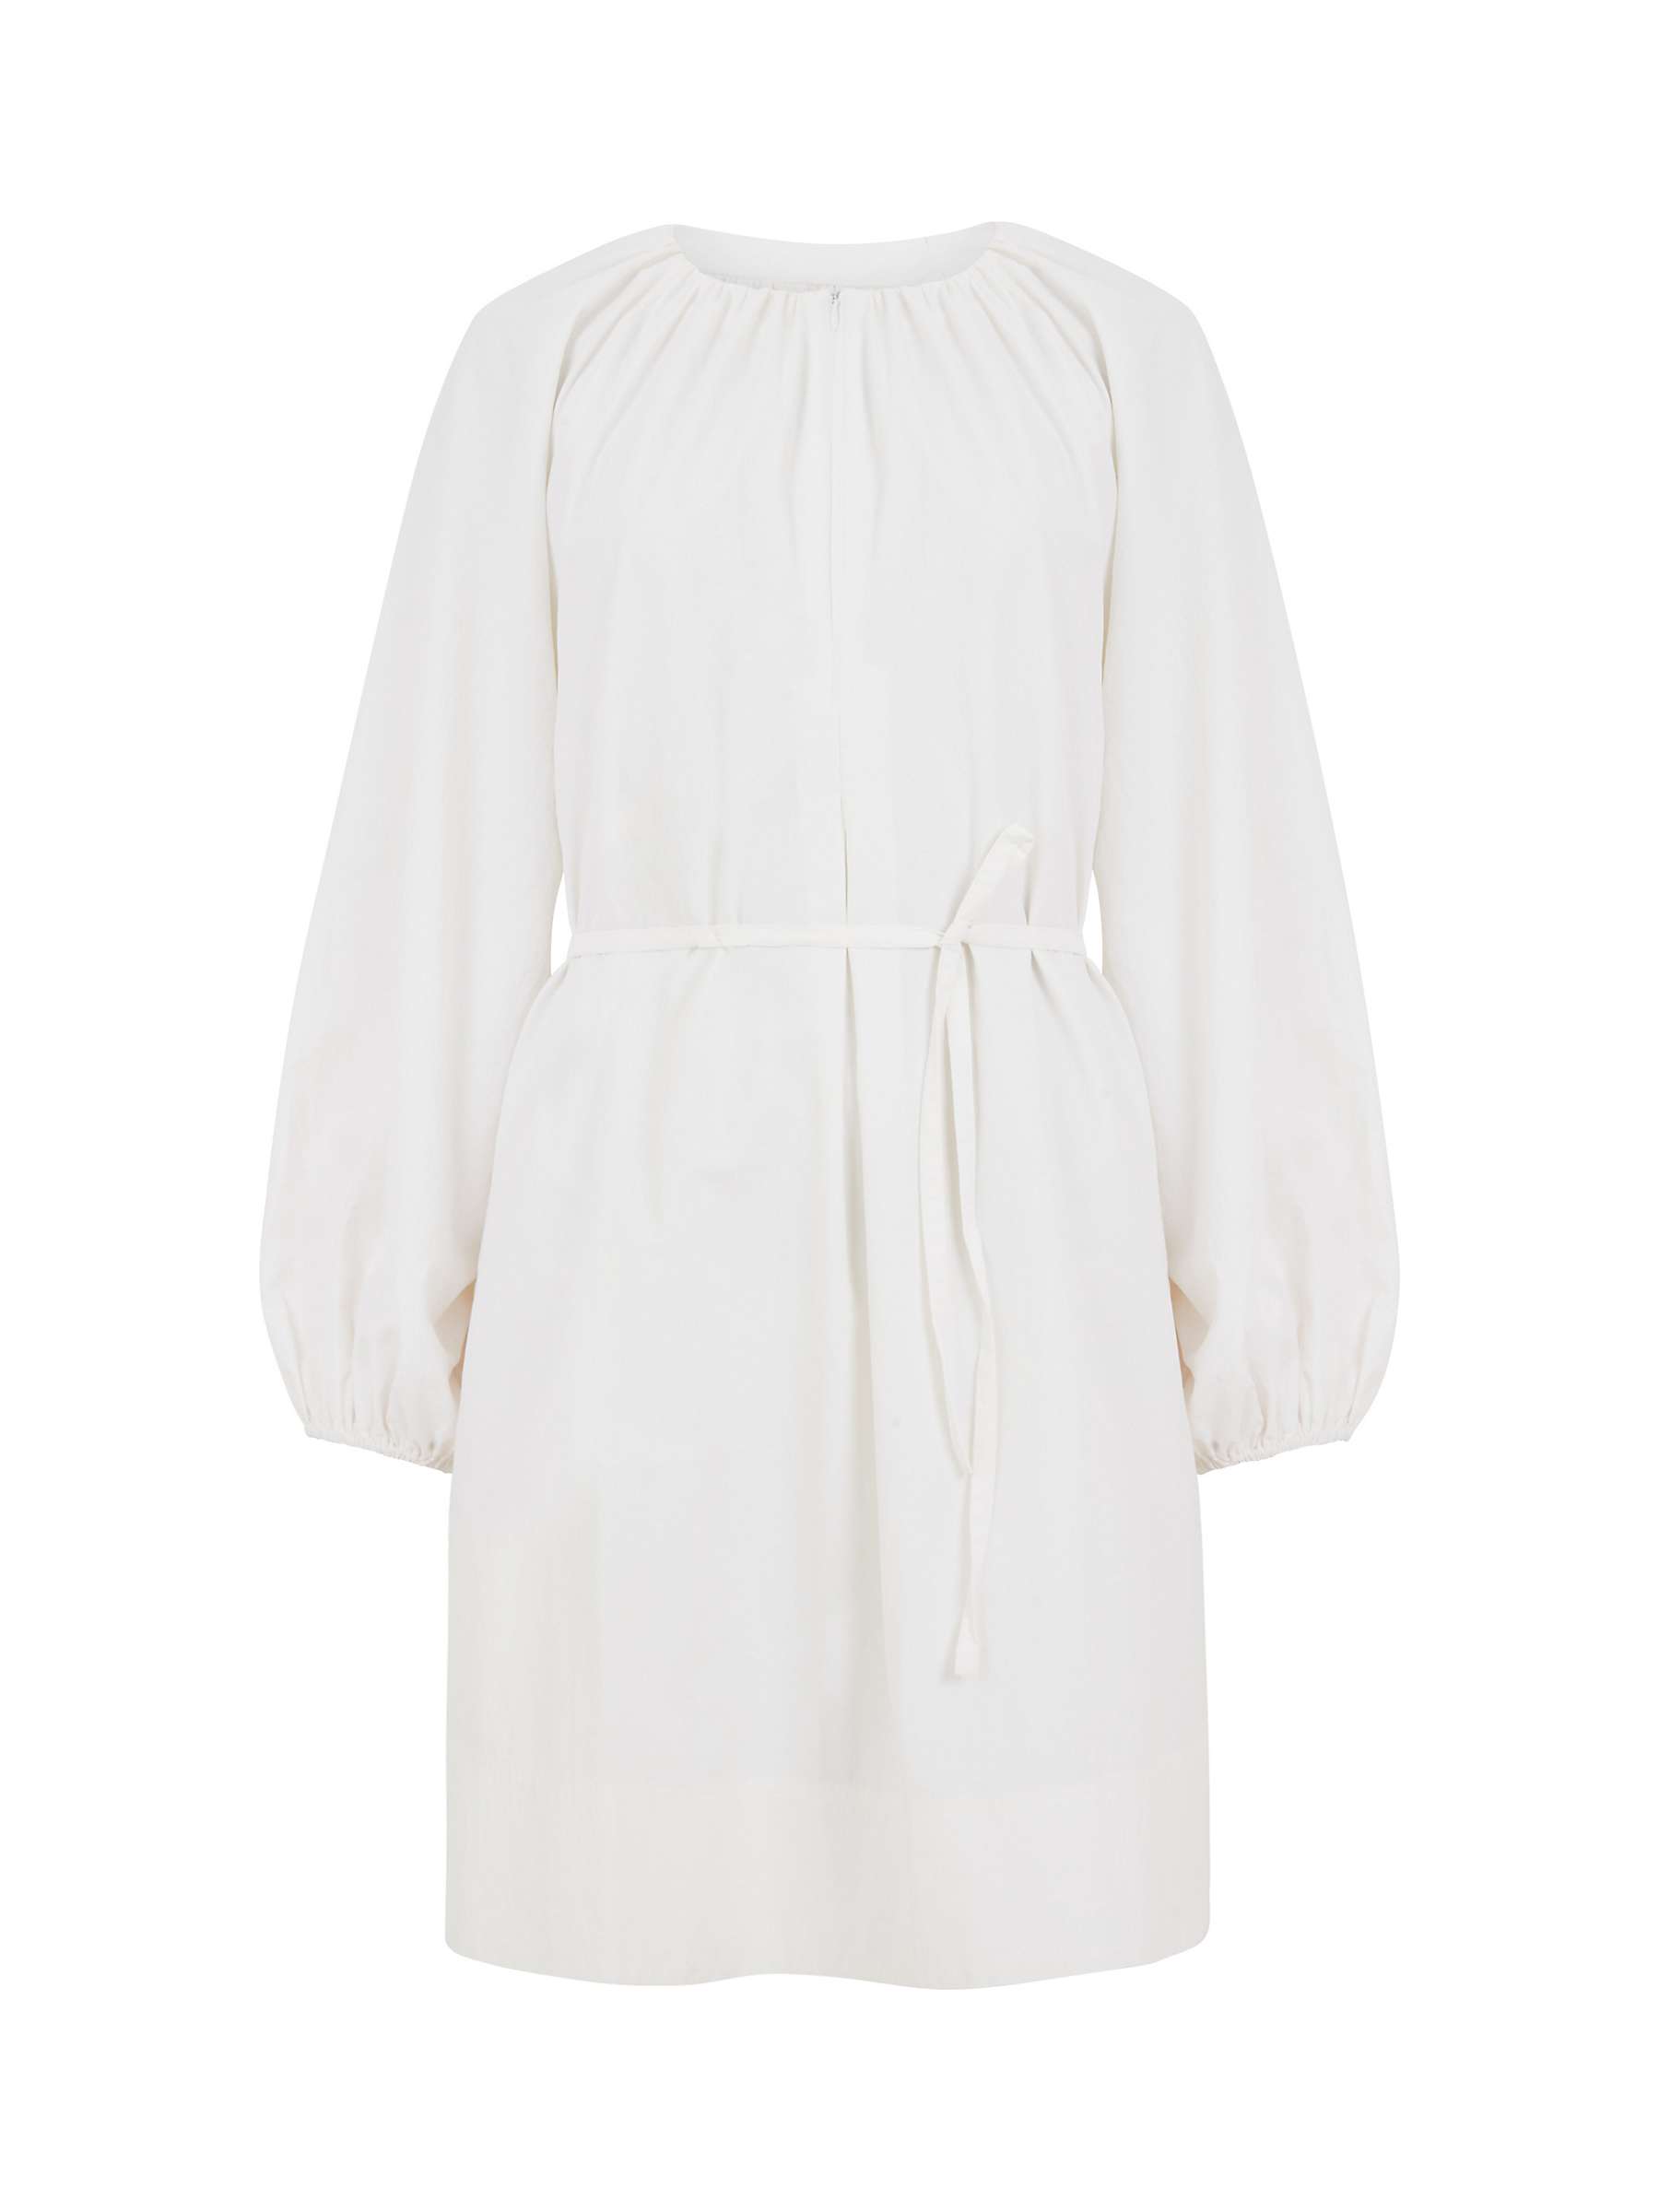 Buy French Connection Alora Puff Sleeve Mini Dress Online at johnlewis.com